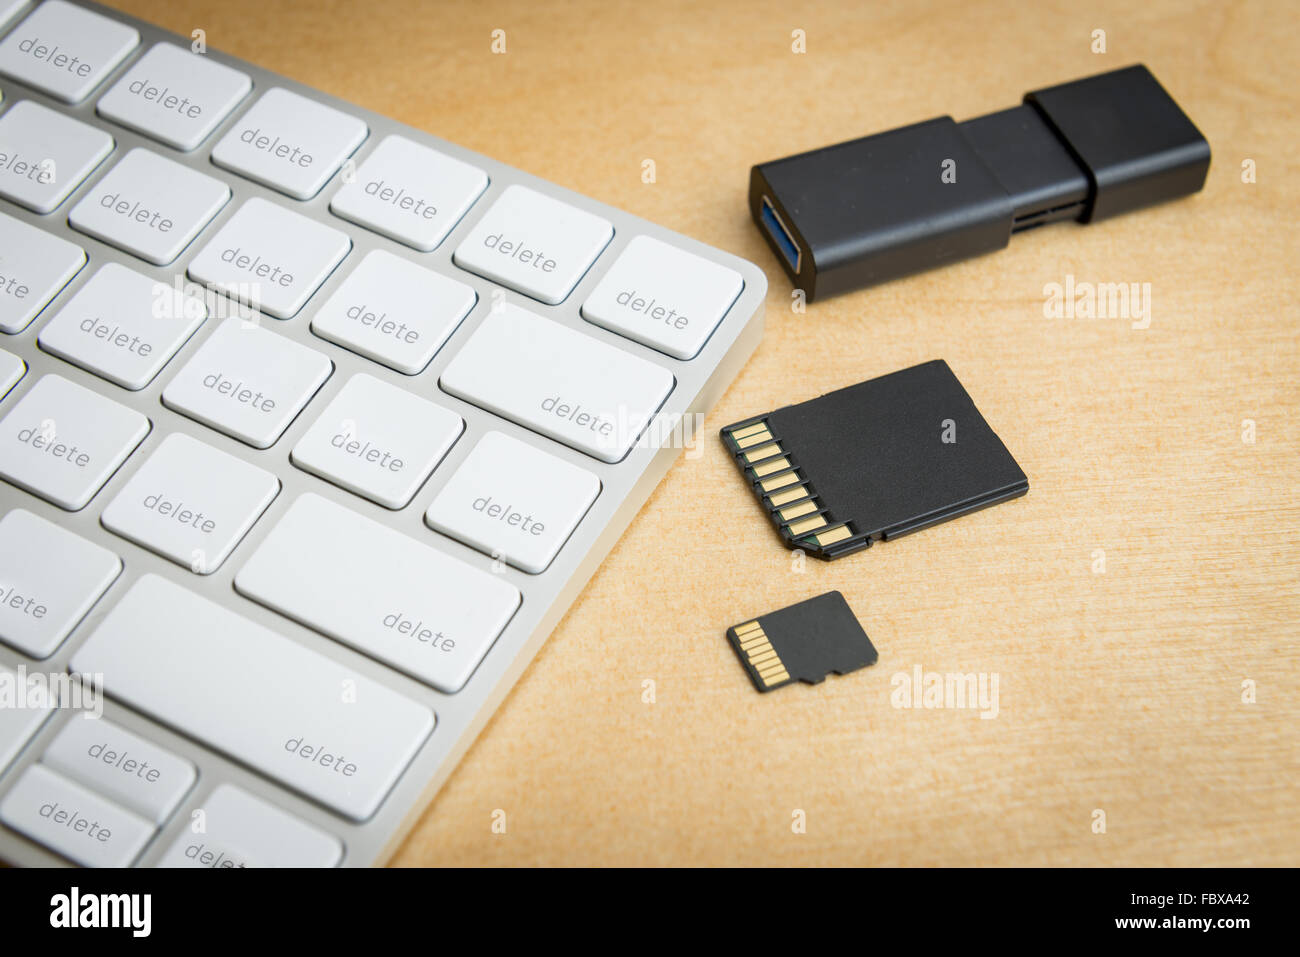 close up wireless keyboard with many delete buttons and three types of memory storage, SD, mini SD, flash drive Stock Photo